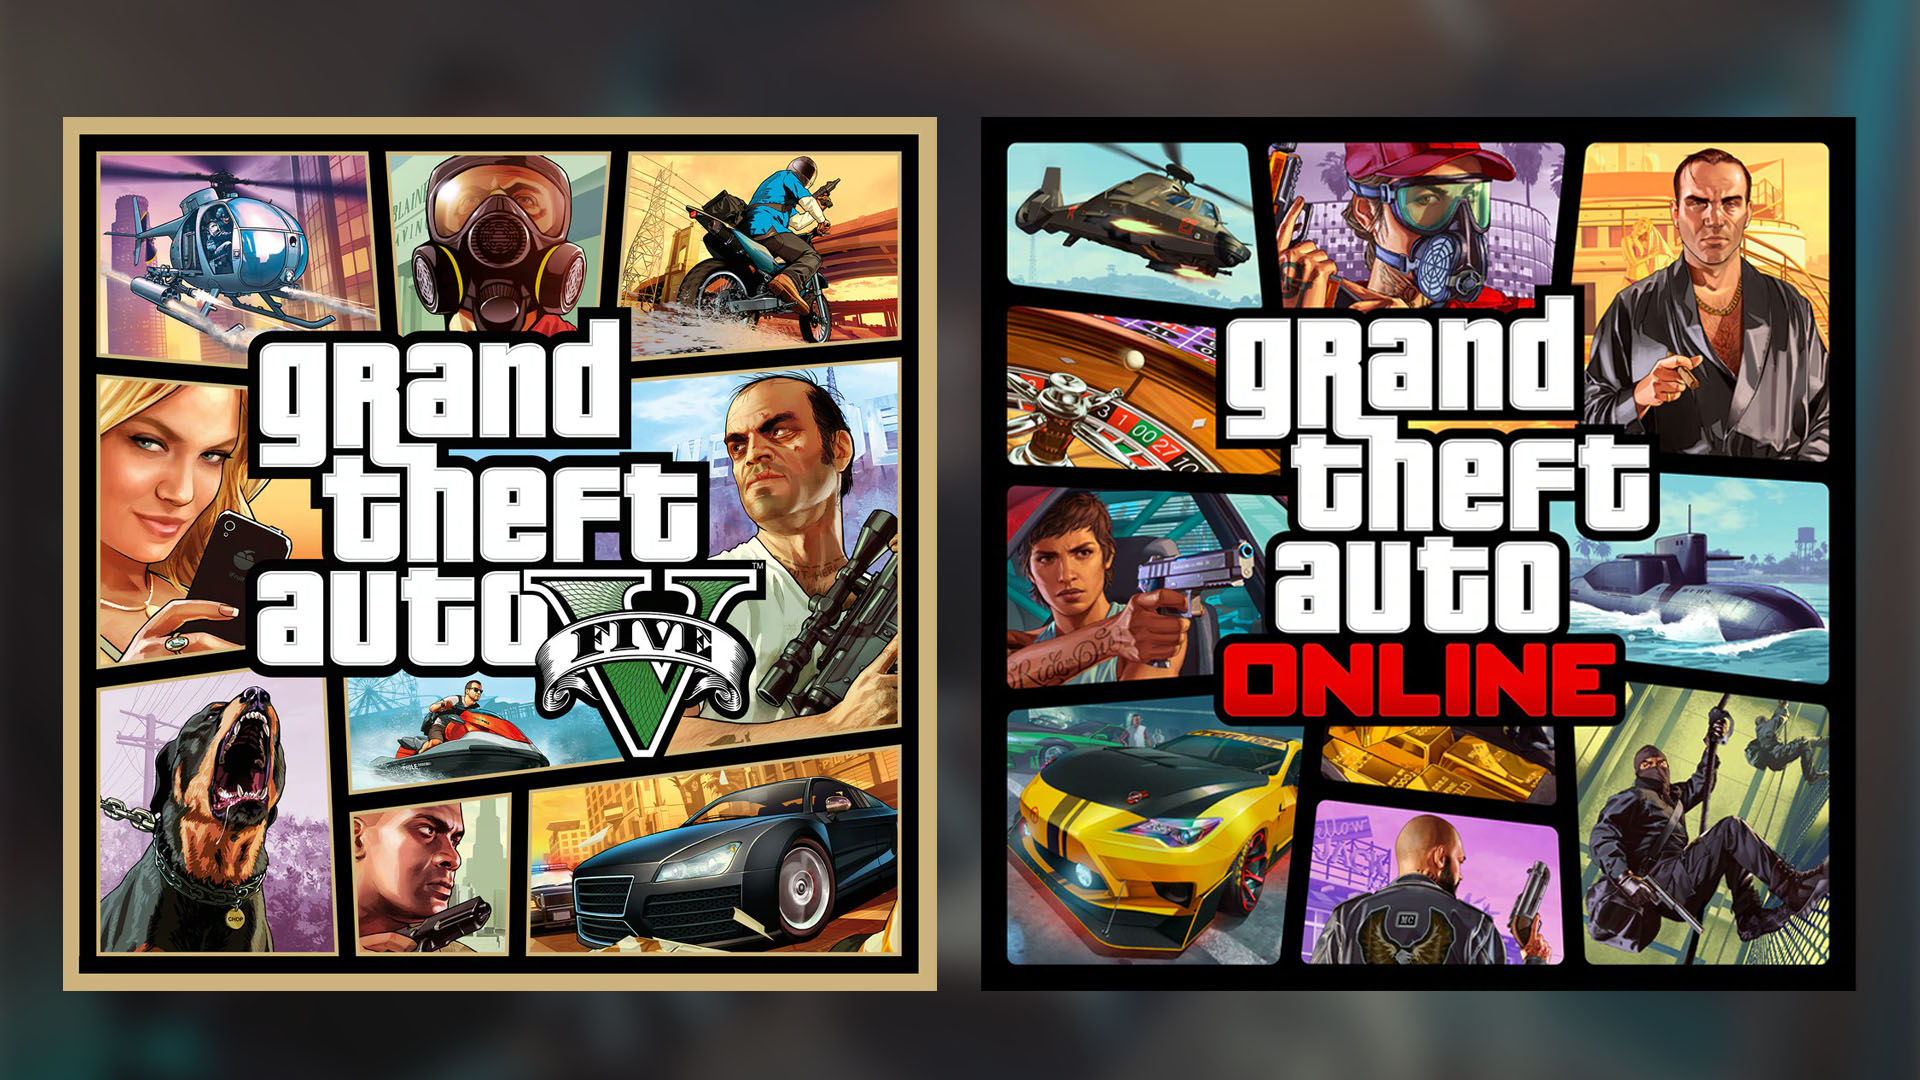 GTA Online standalone will be free on PS5 for limited time following launch